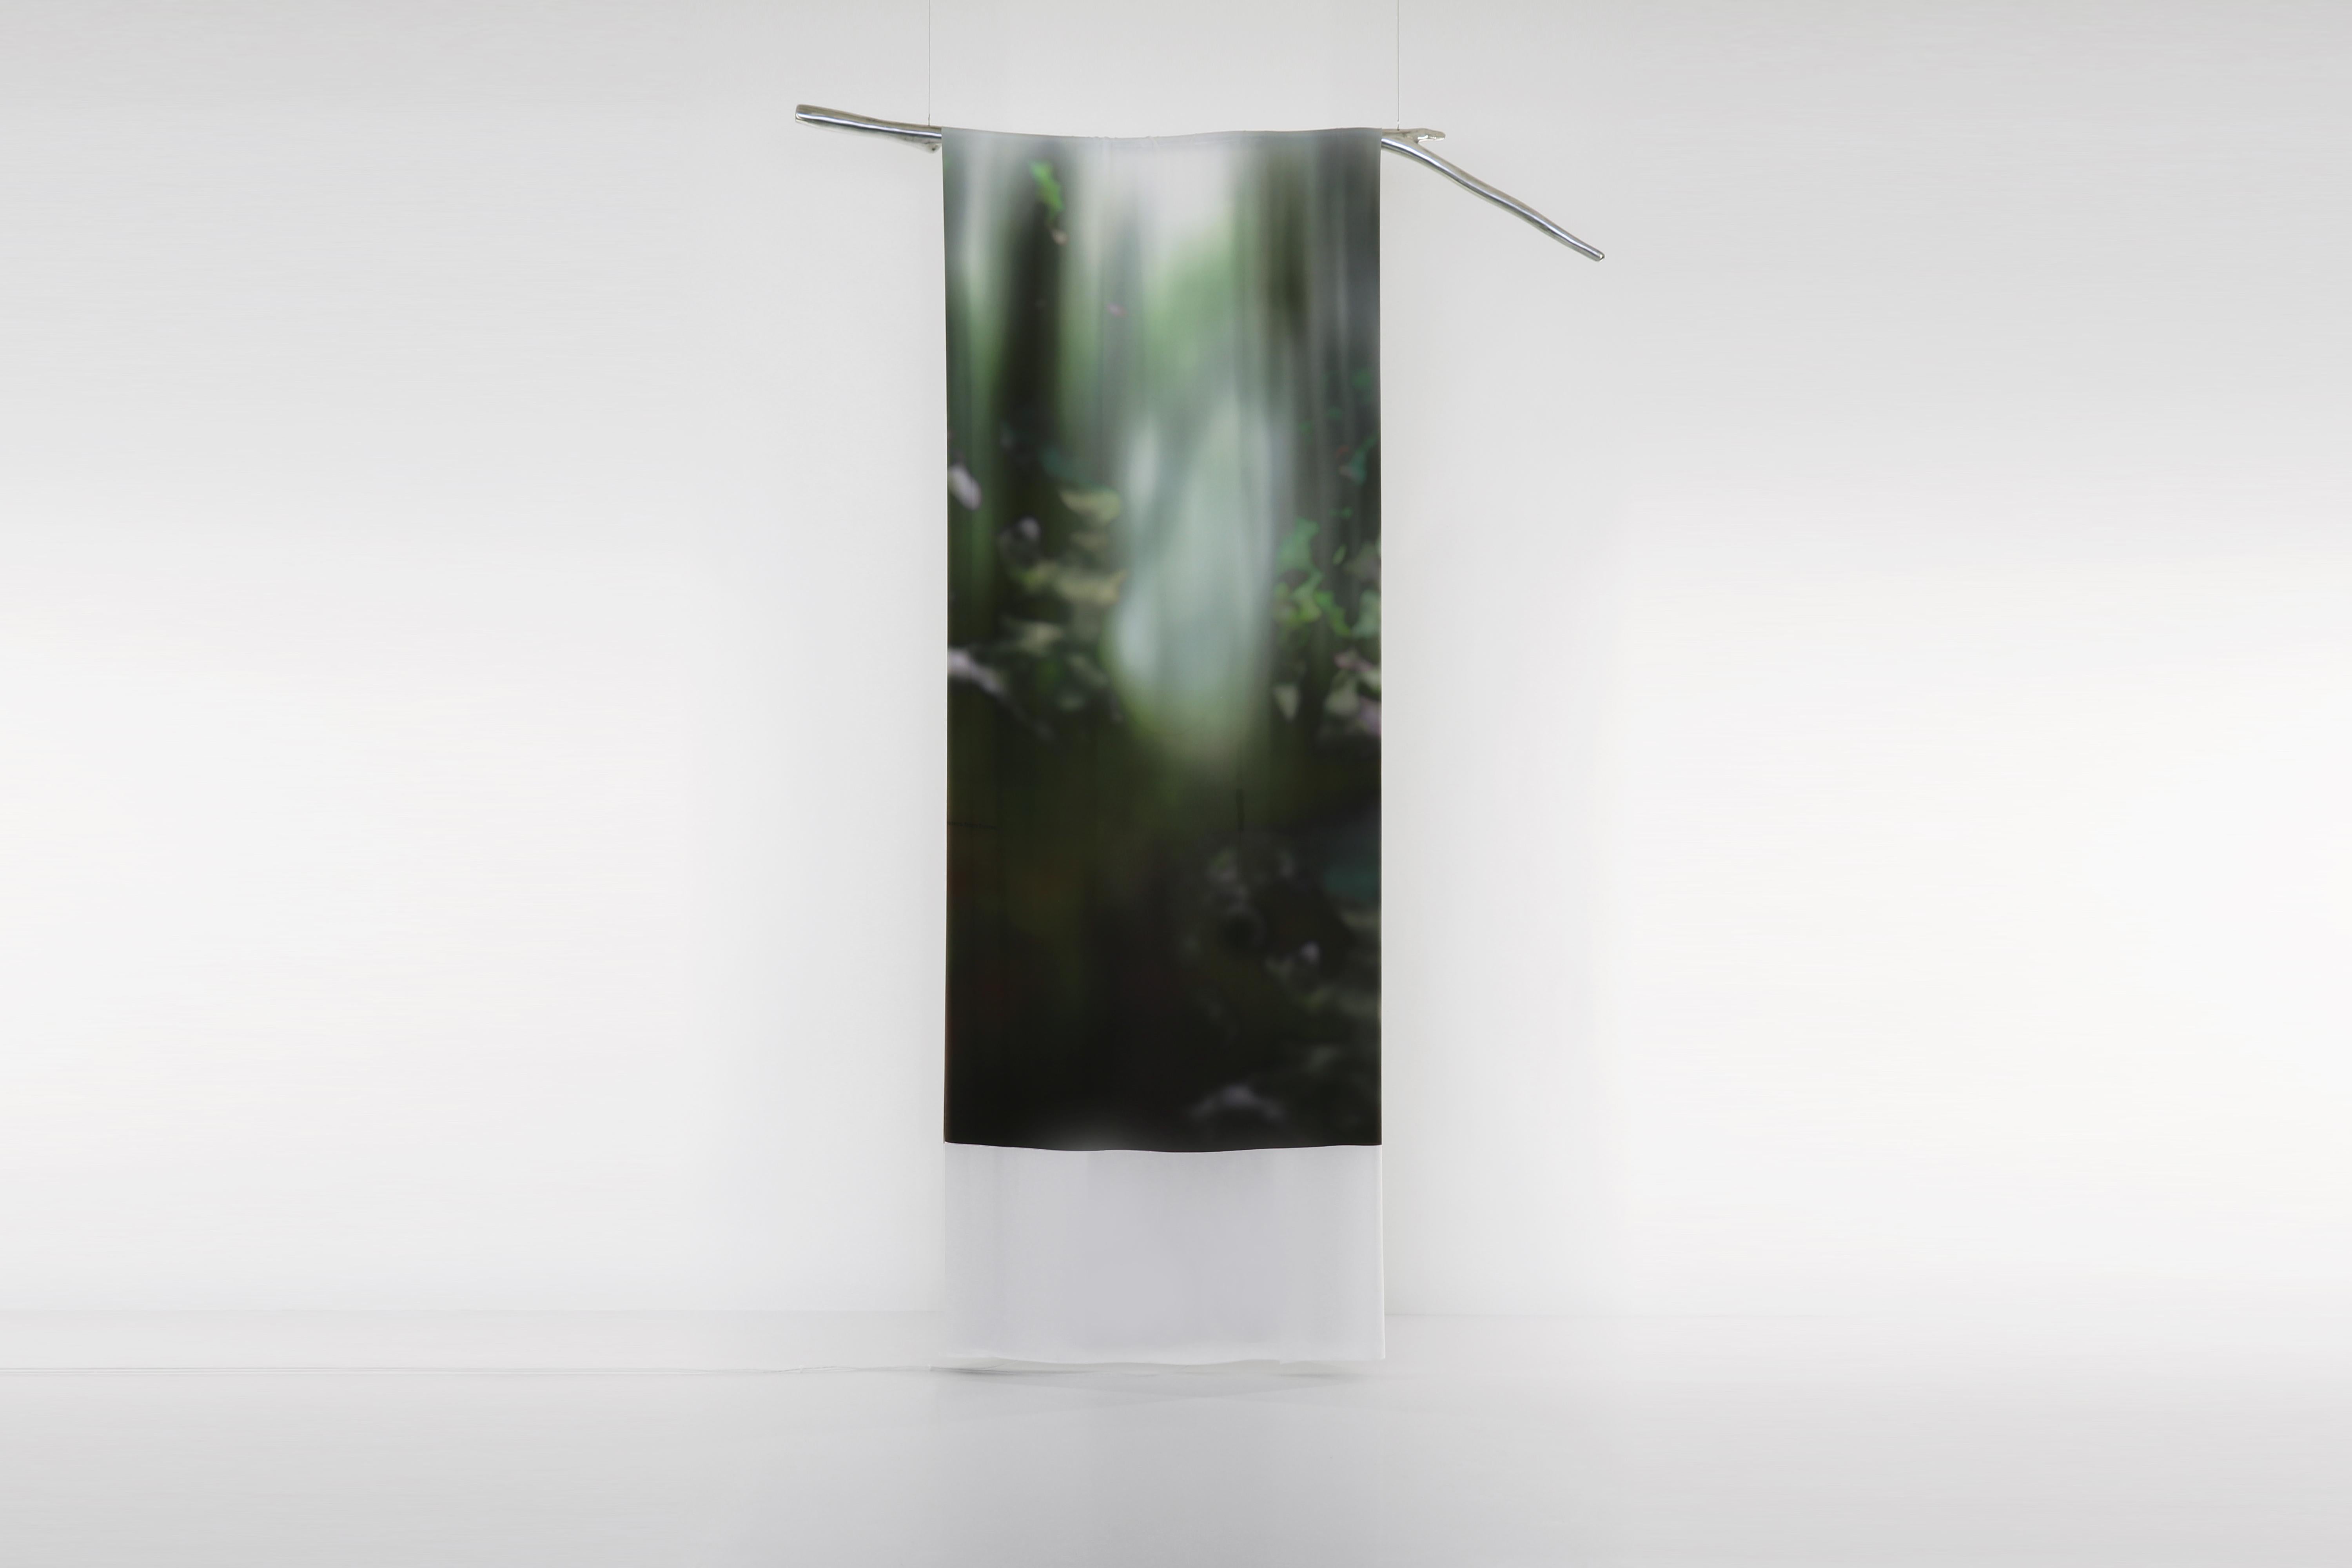 Hong Kong Longing for the Company of Trees Green Fabric Light by Batten and Kamp For Sale